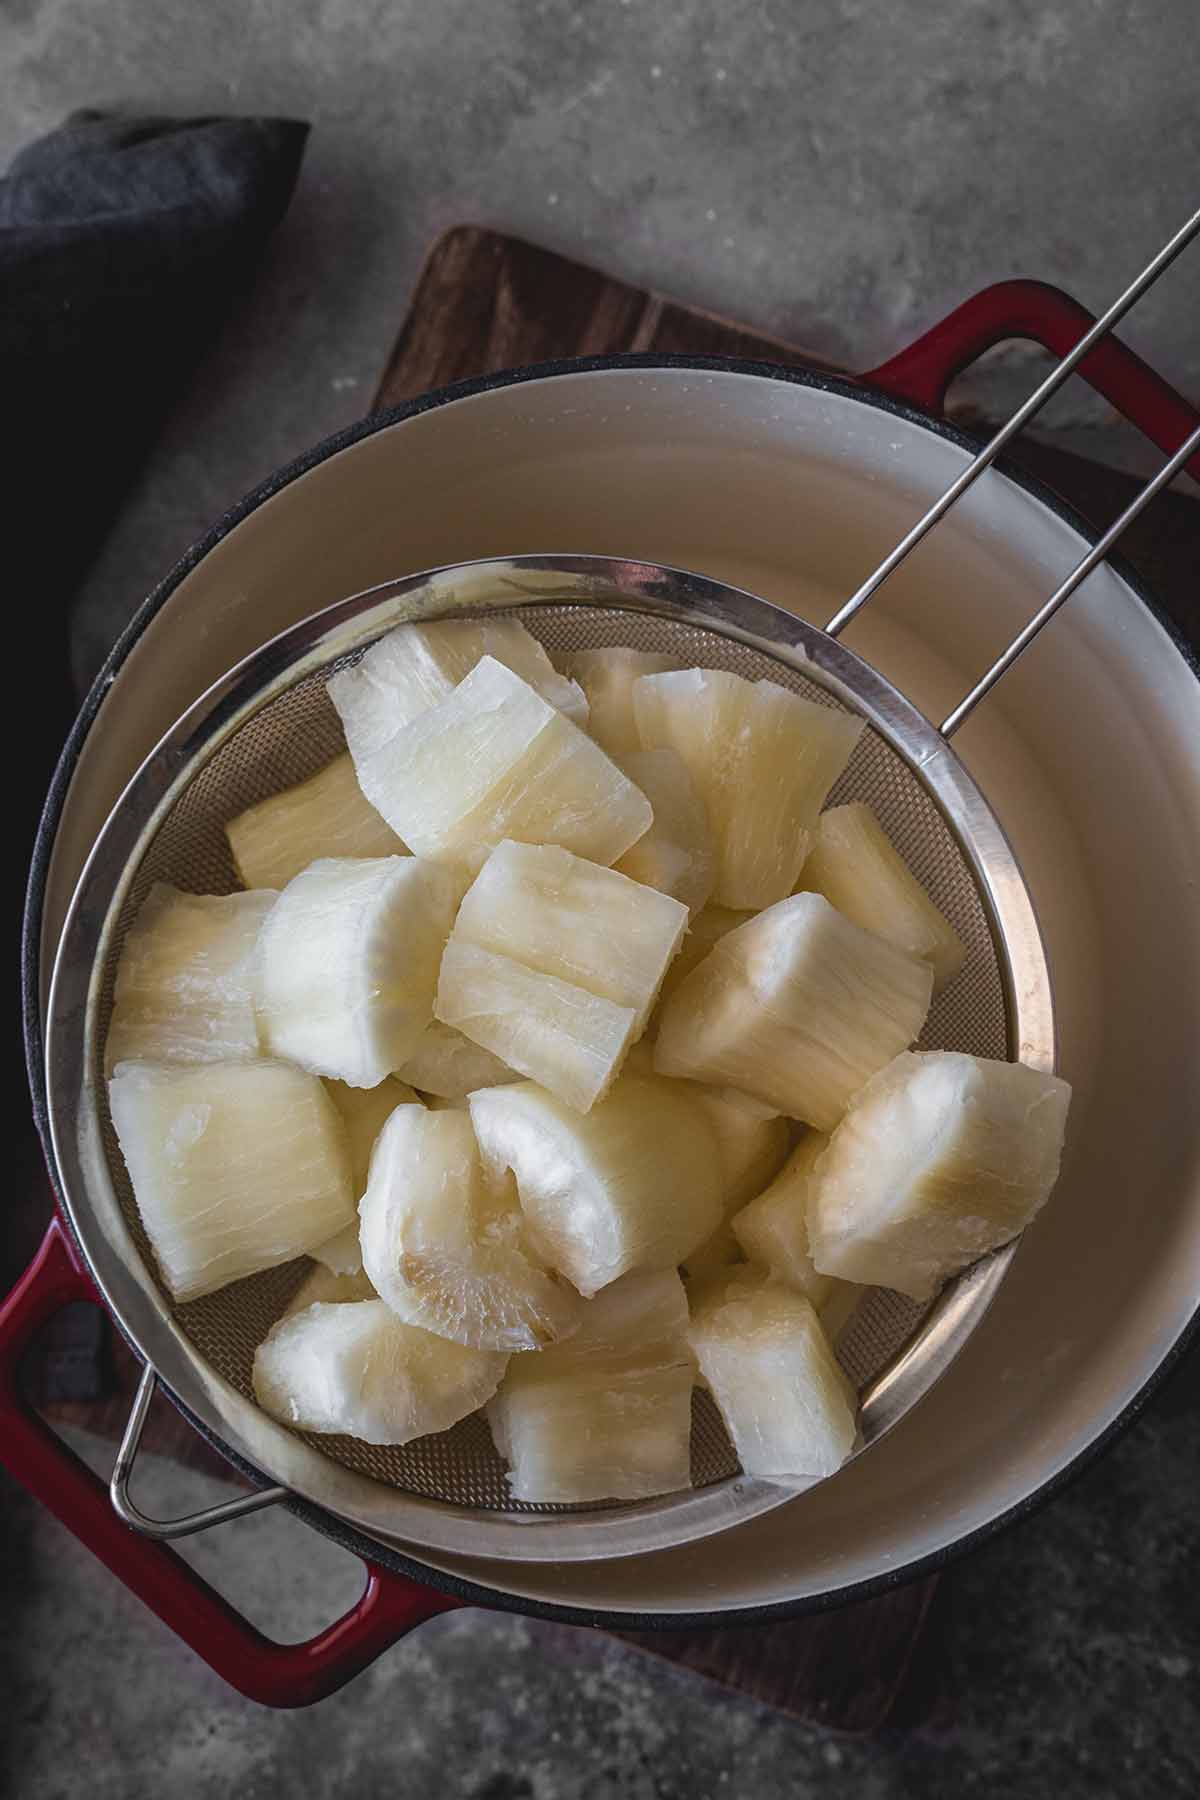 Boiled cassava root chunks in a colander